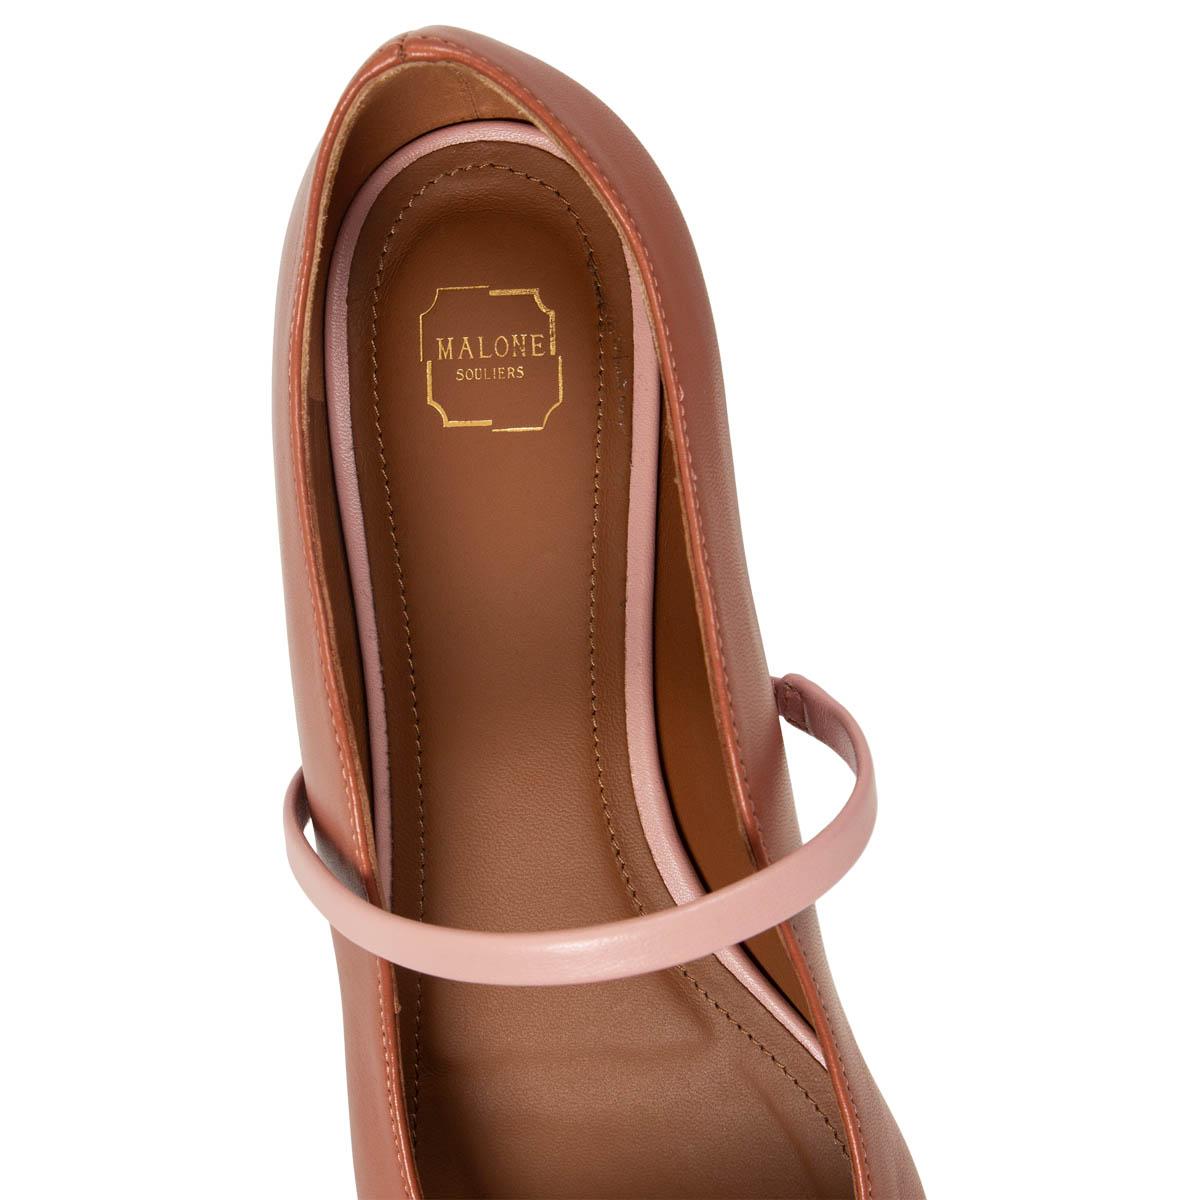 MALONE SOULIERS brick & pink leather MAUREEN Ballet Flats Shoes 38.5 In New Condition For Sale In Zürich, CH